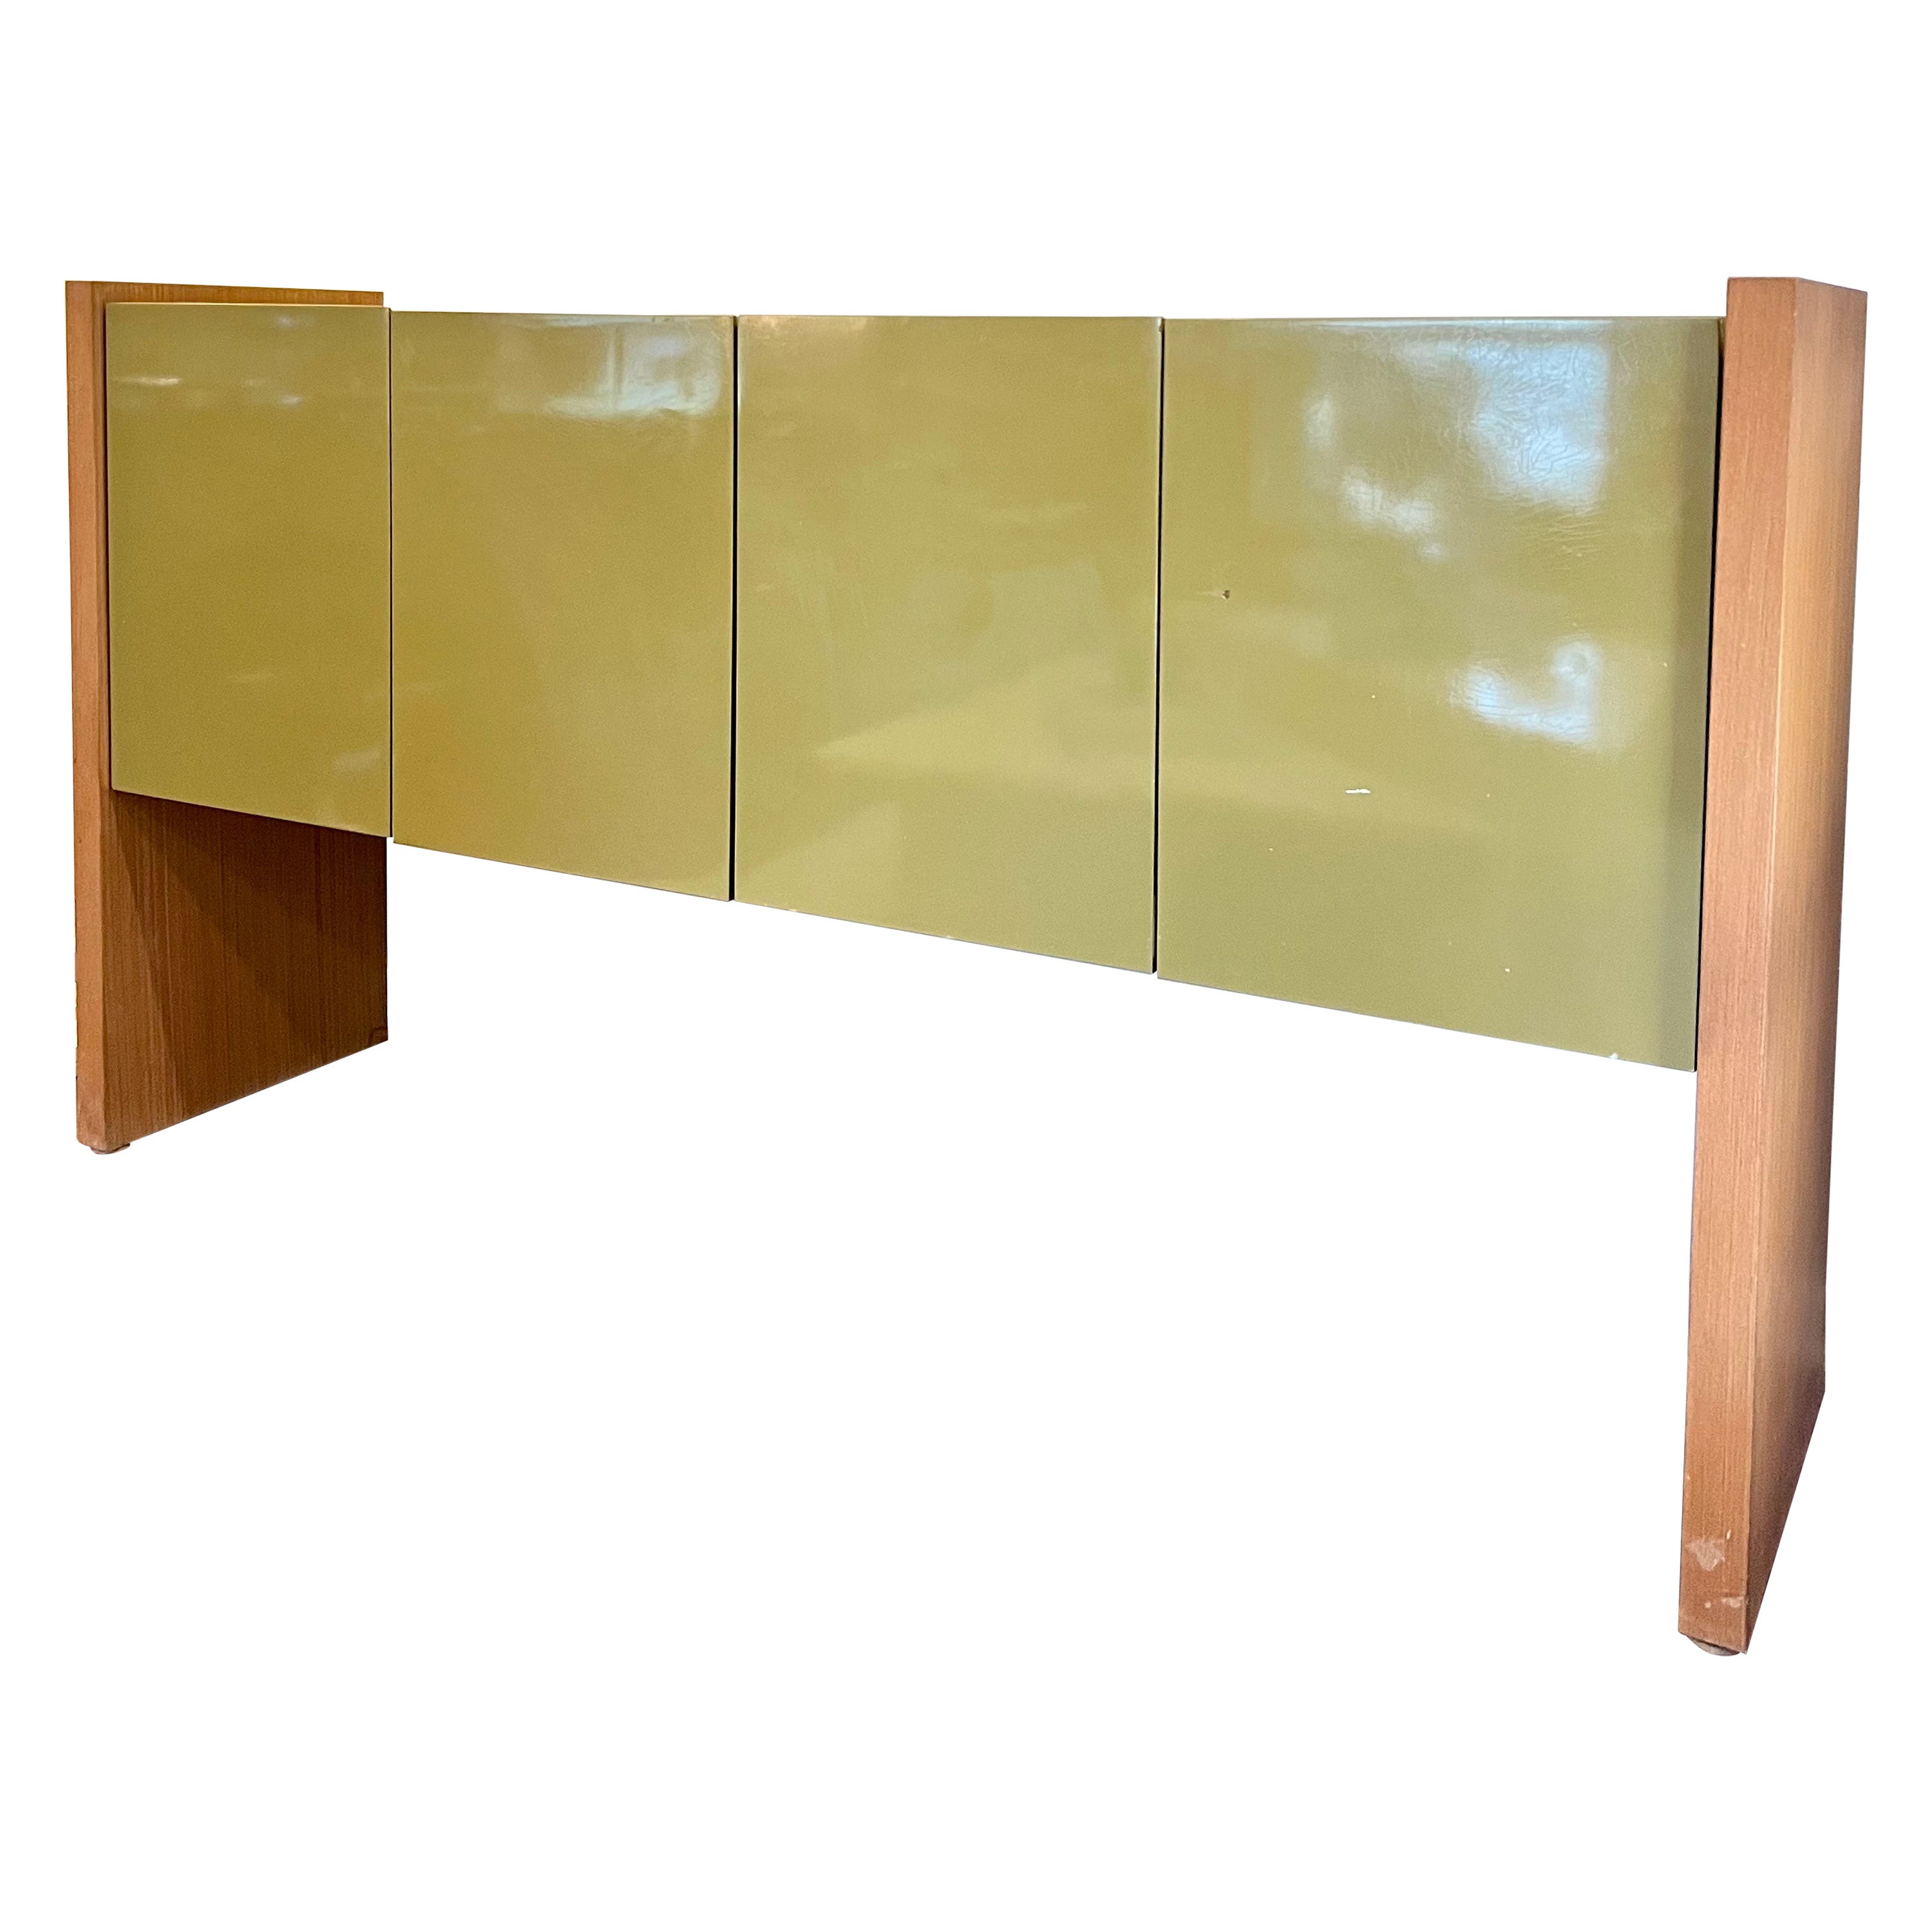 Vintage Mid-Century Modern Green Lacquer and Wood Milo Baughman Credenza